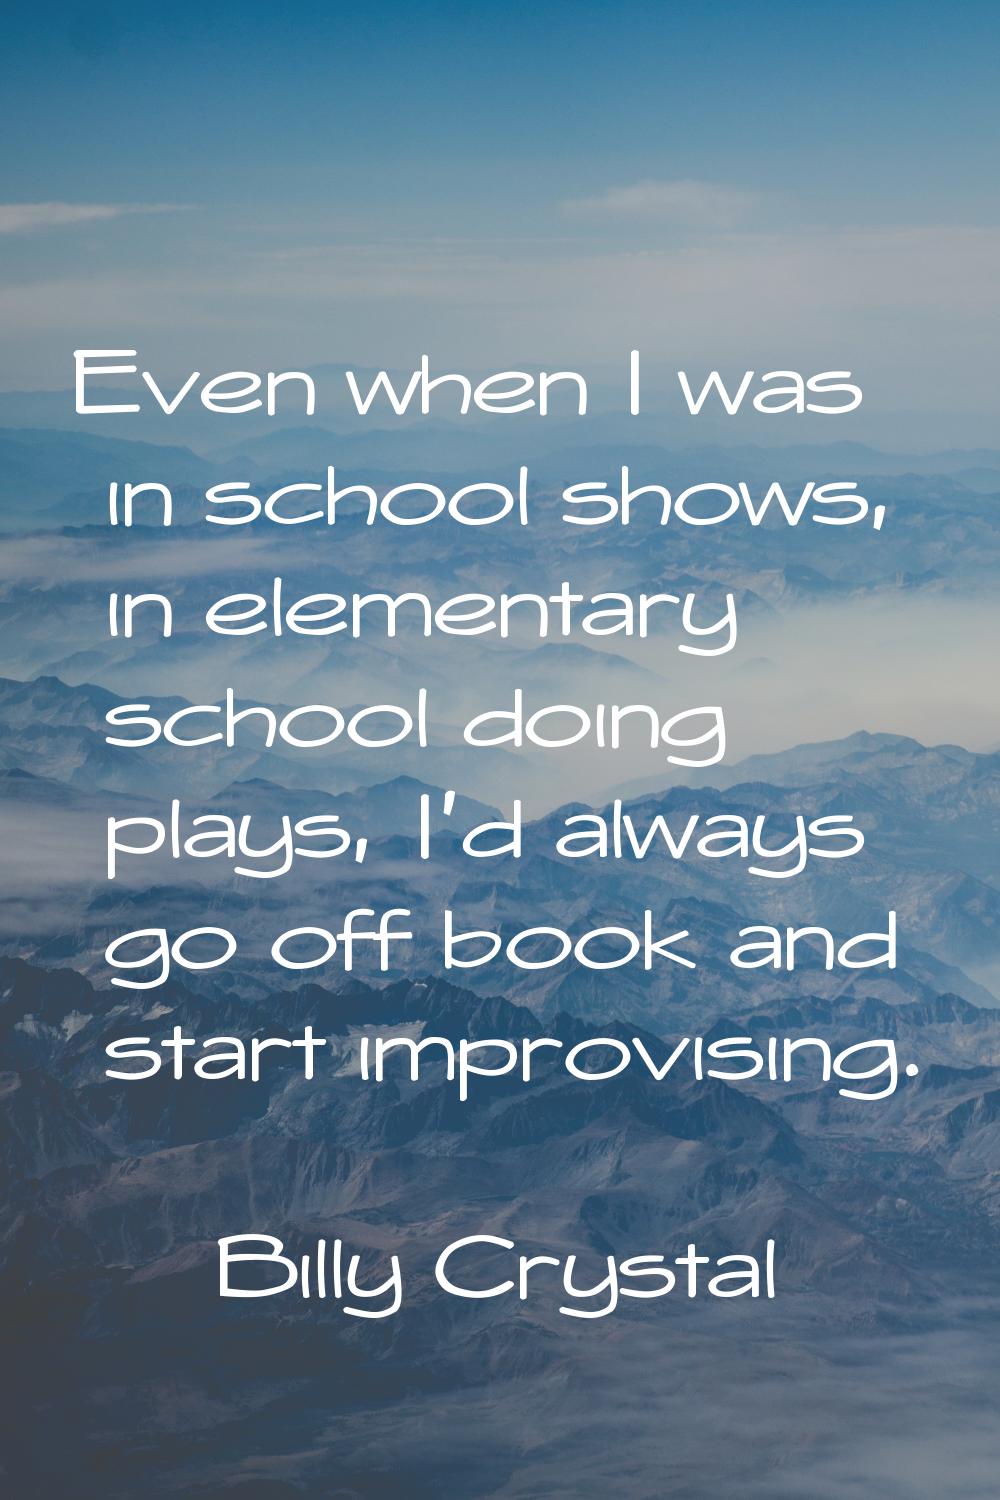 Even when I was in school shows, in elementary school doing plays, I'd always go off book and start